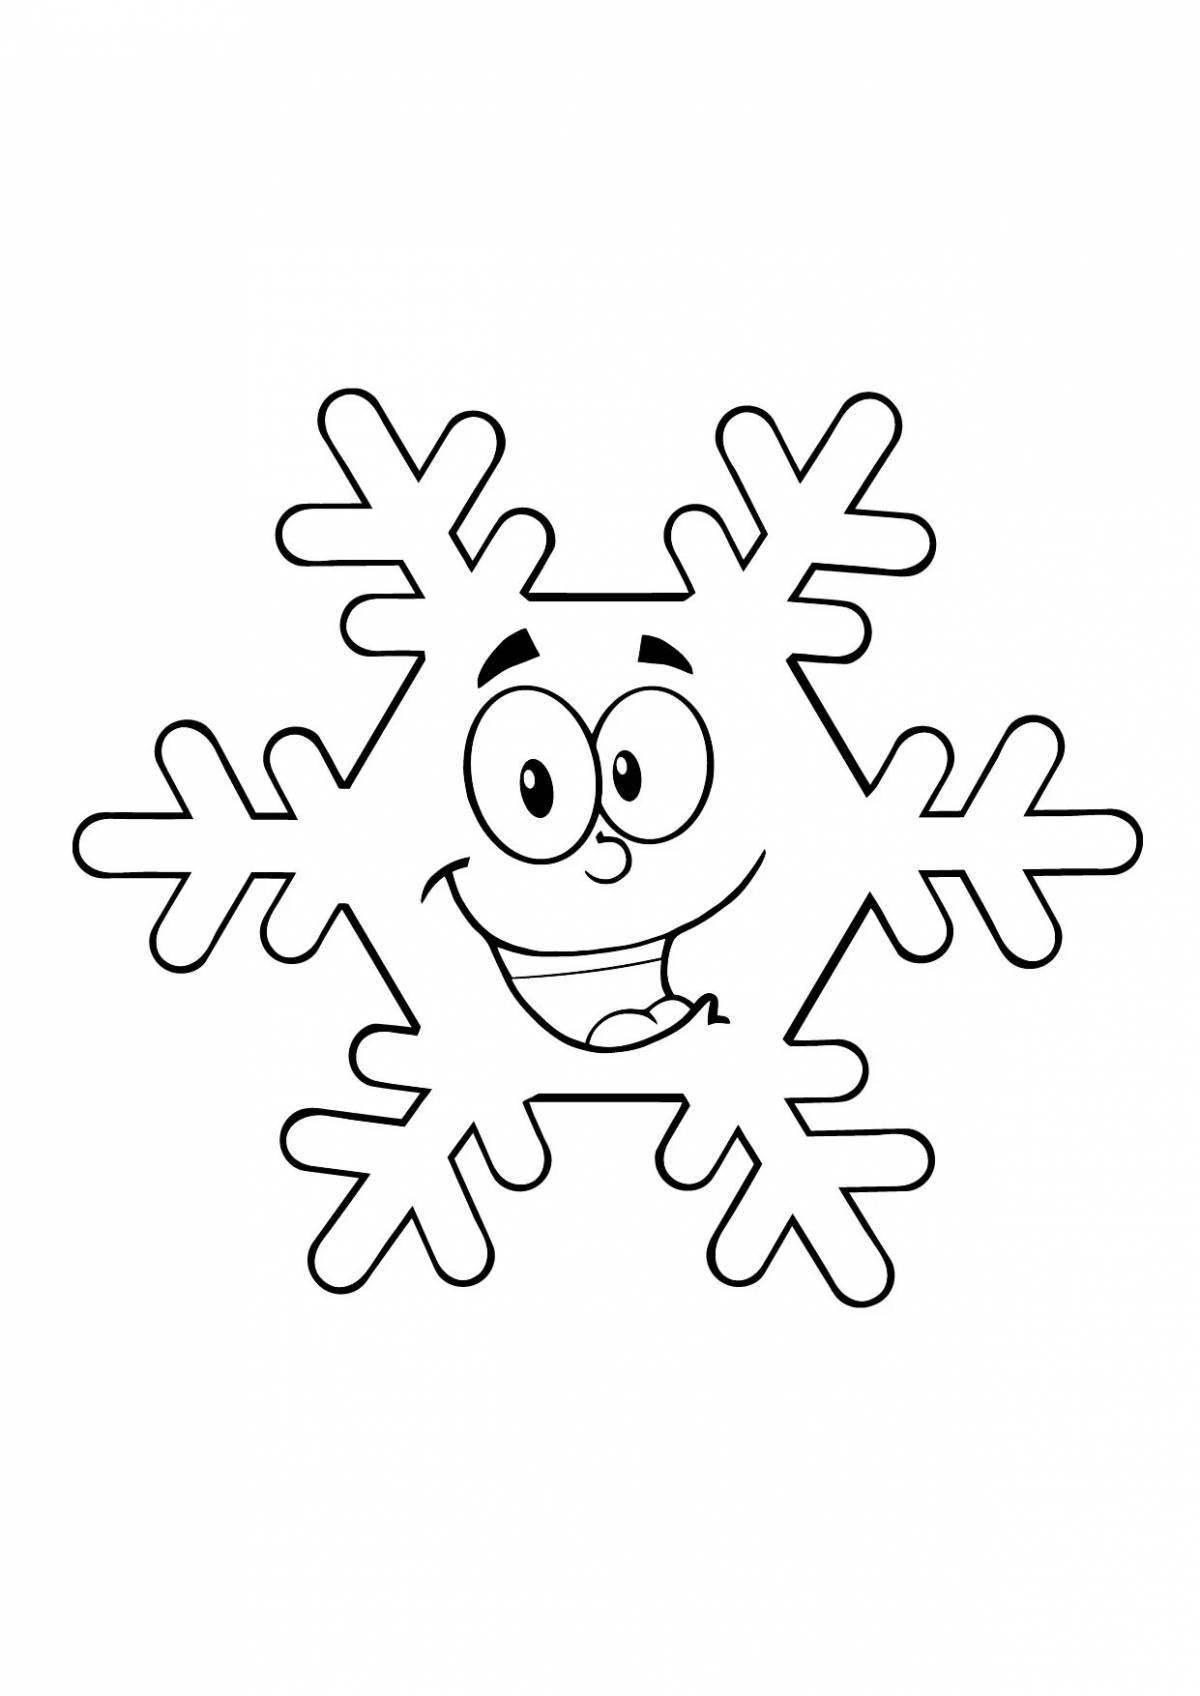 Great snowflake coloring page